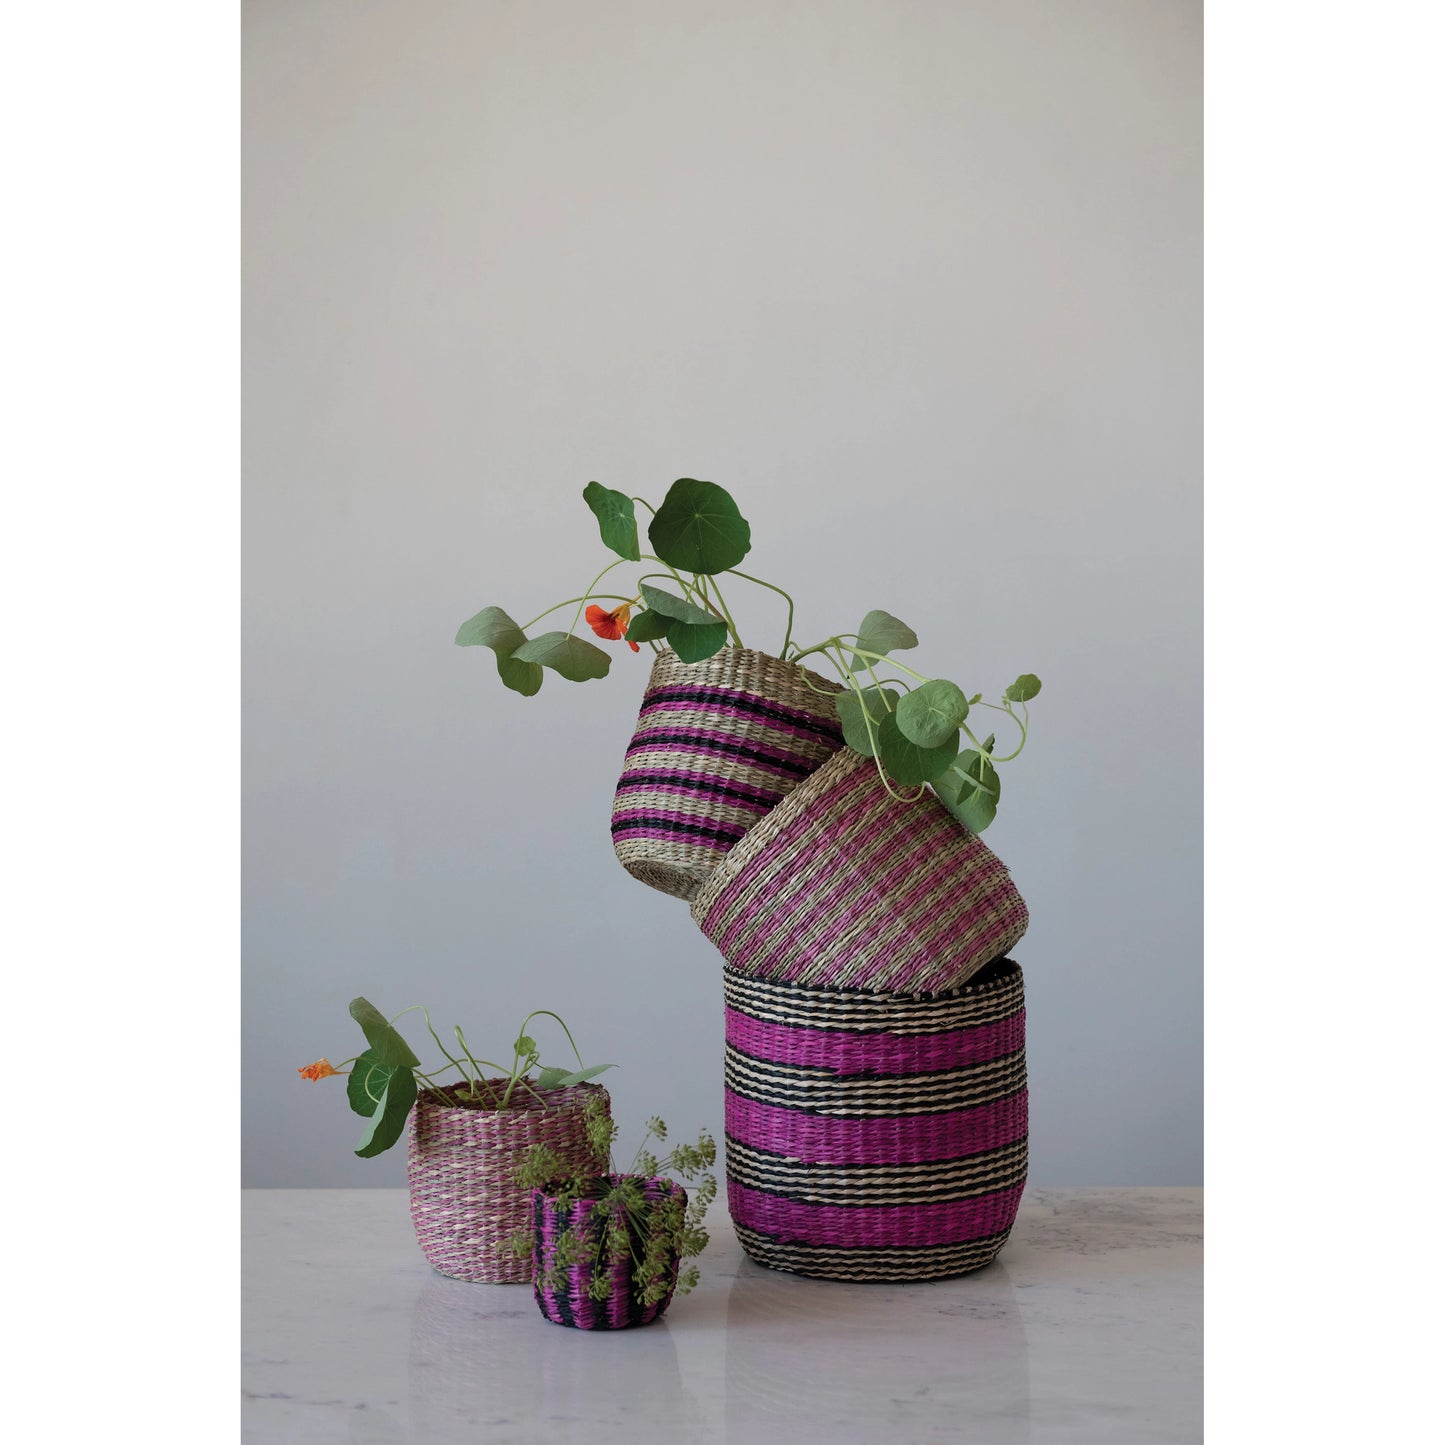 5 sizes and styles of pink, black, and natural seagrass baskets arranged on a marble countertop, 3 baskets have plants in them.